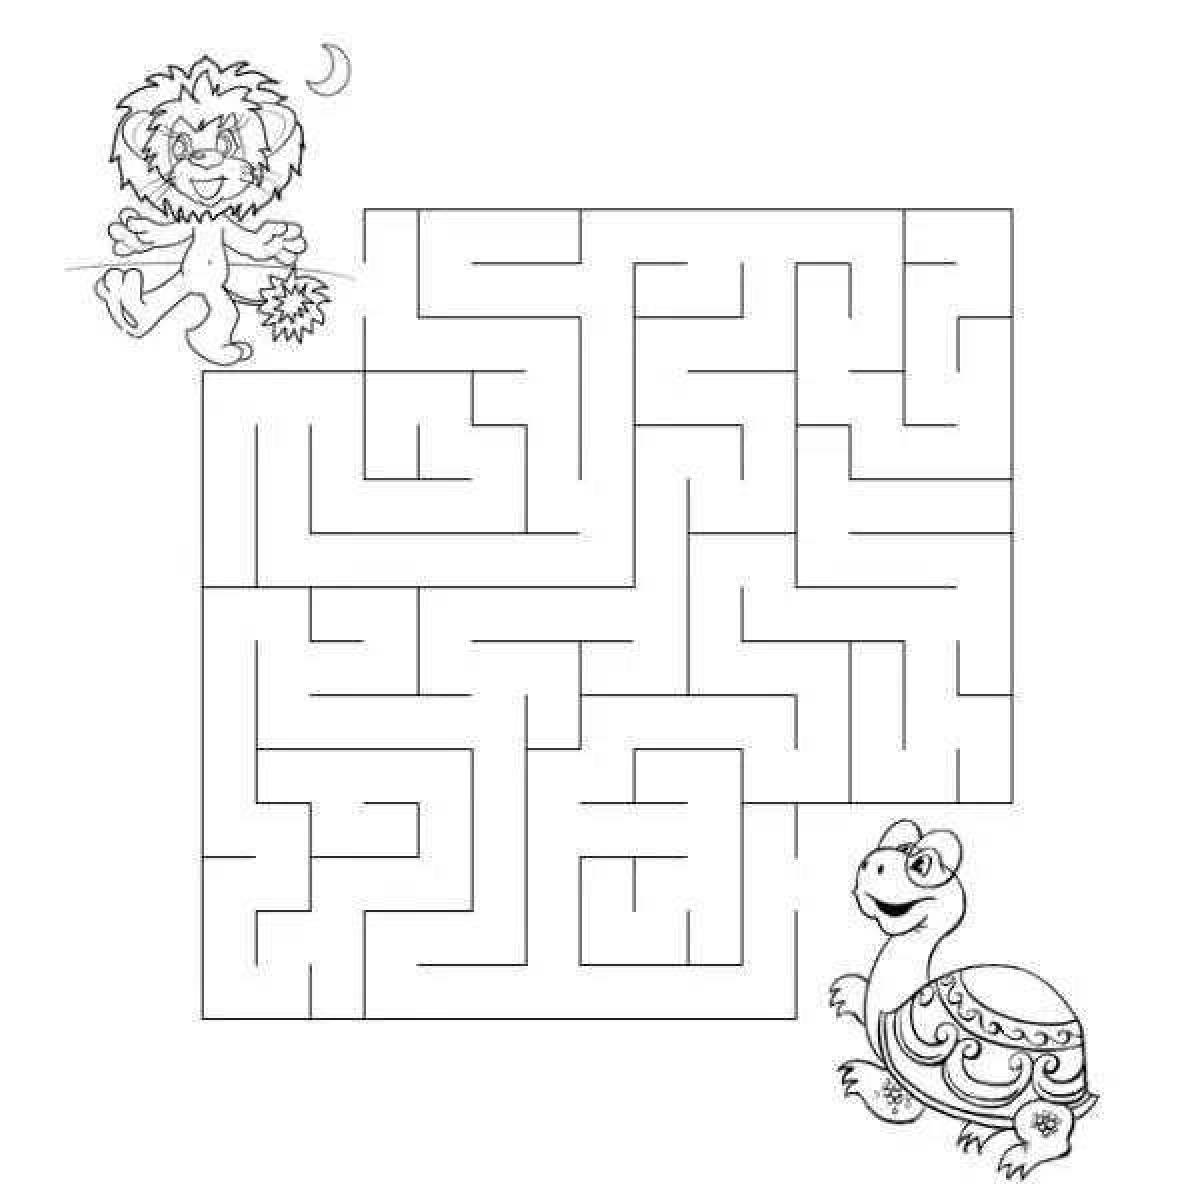 Labyrinth for children 5 6 years old #11